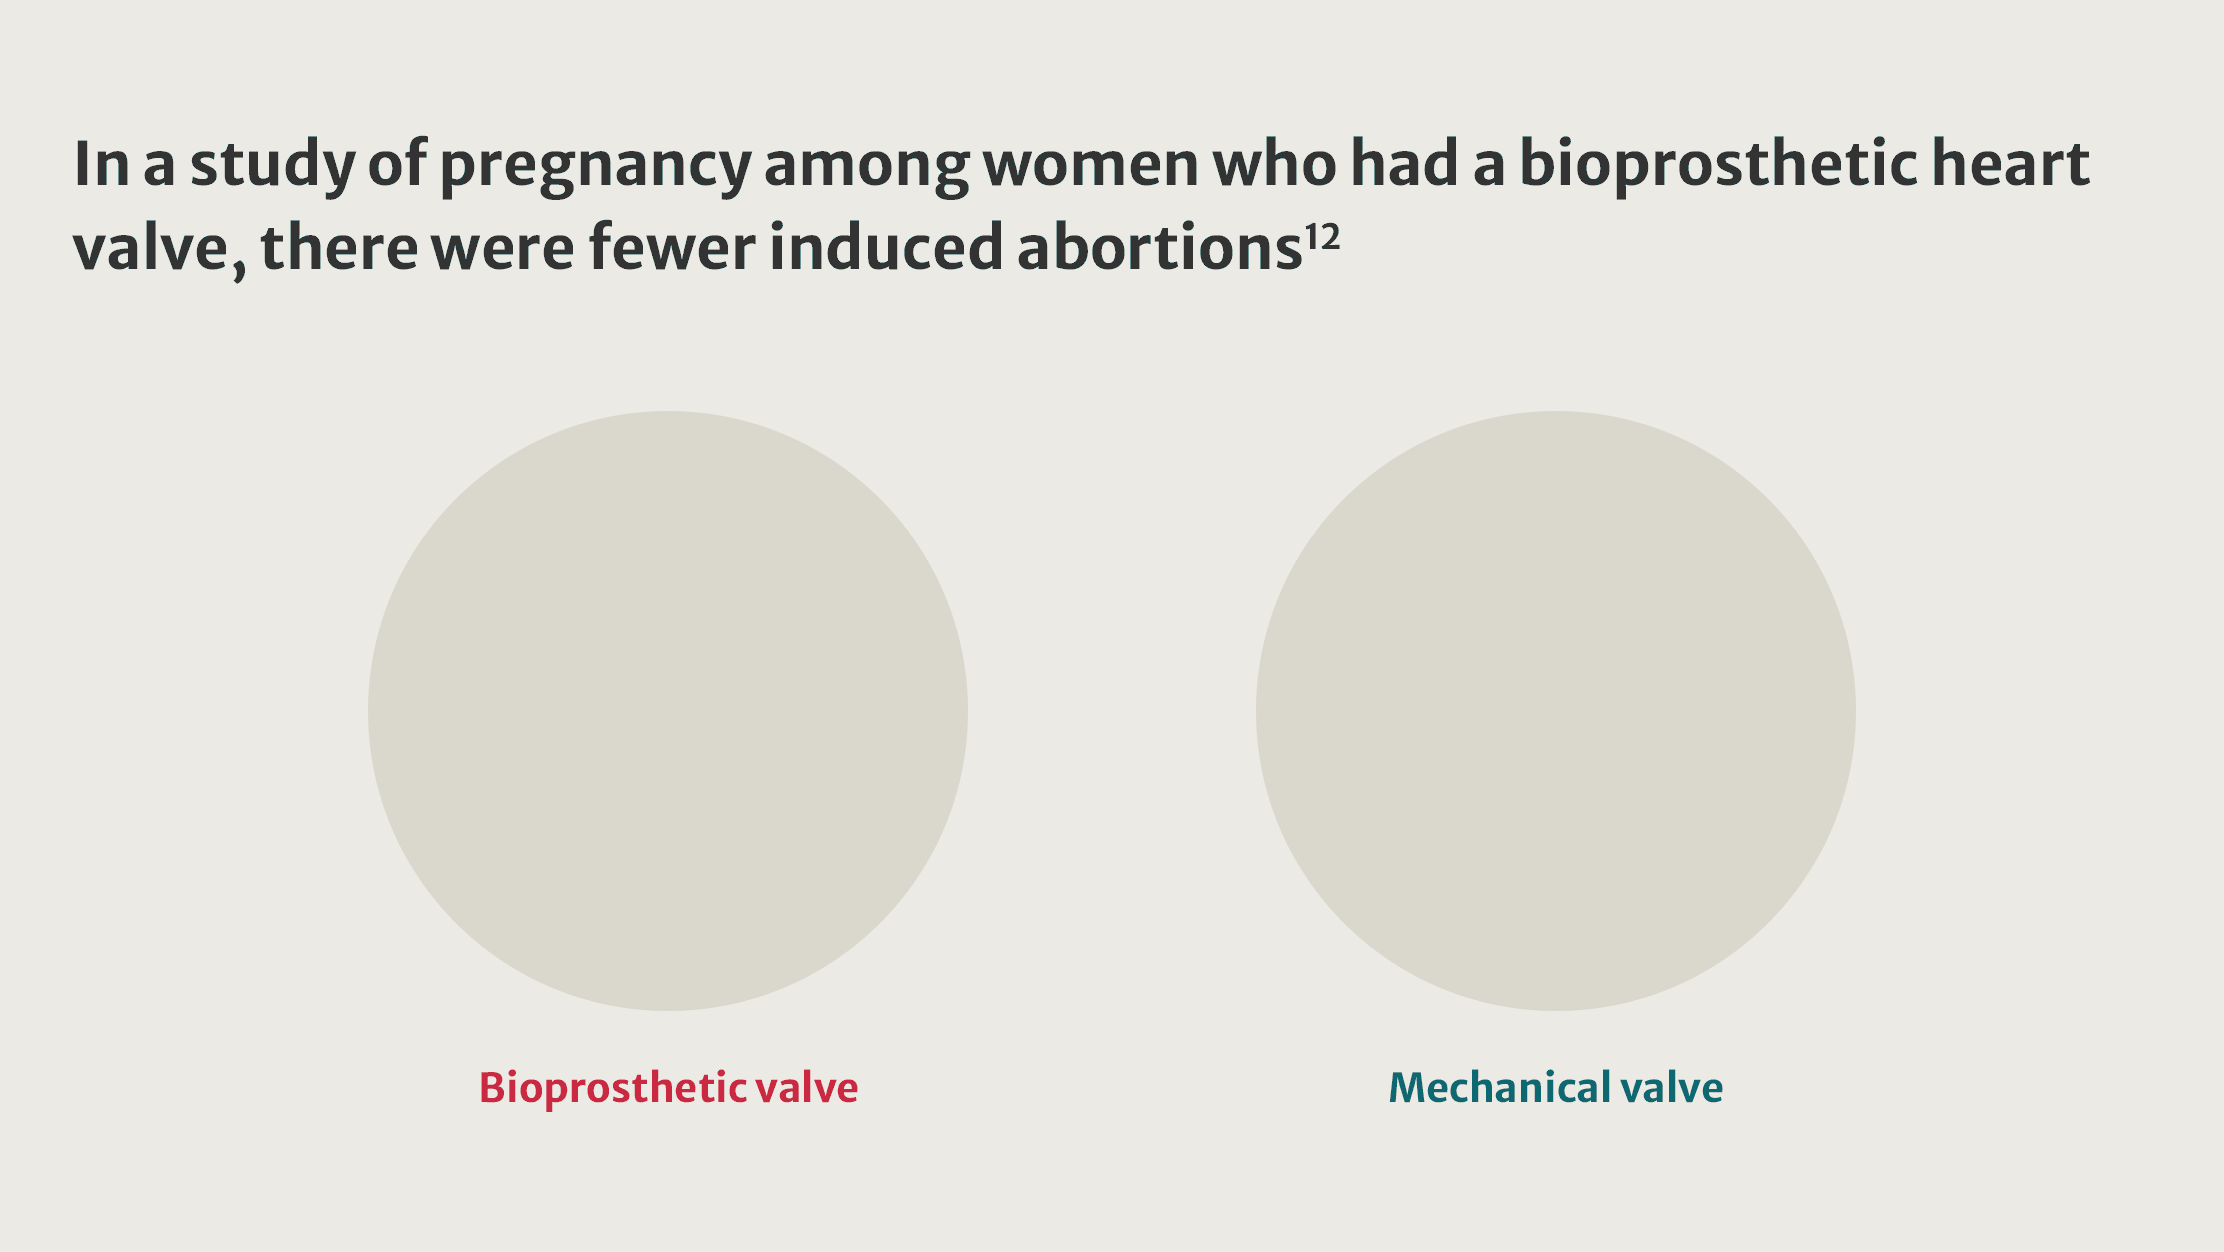 In a study of pregnancy among women who had a bioprosthetic heart valve, there were fewer induced abortions